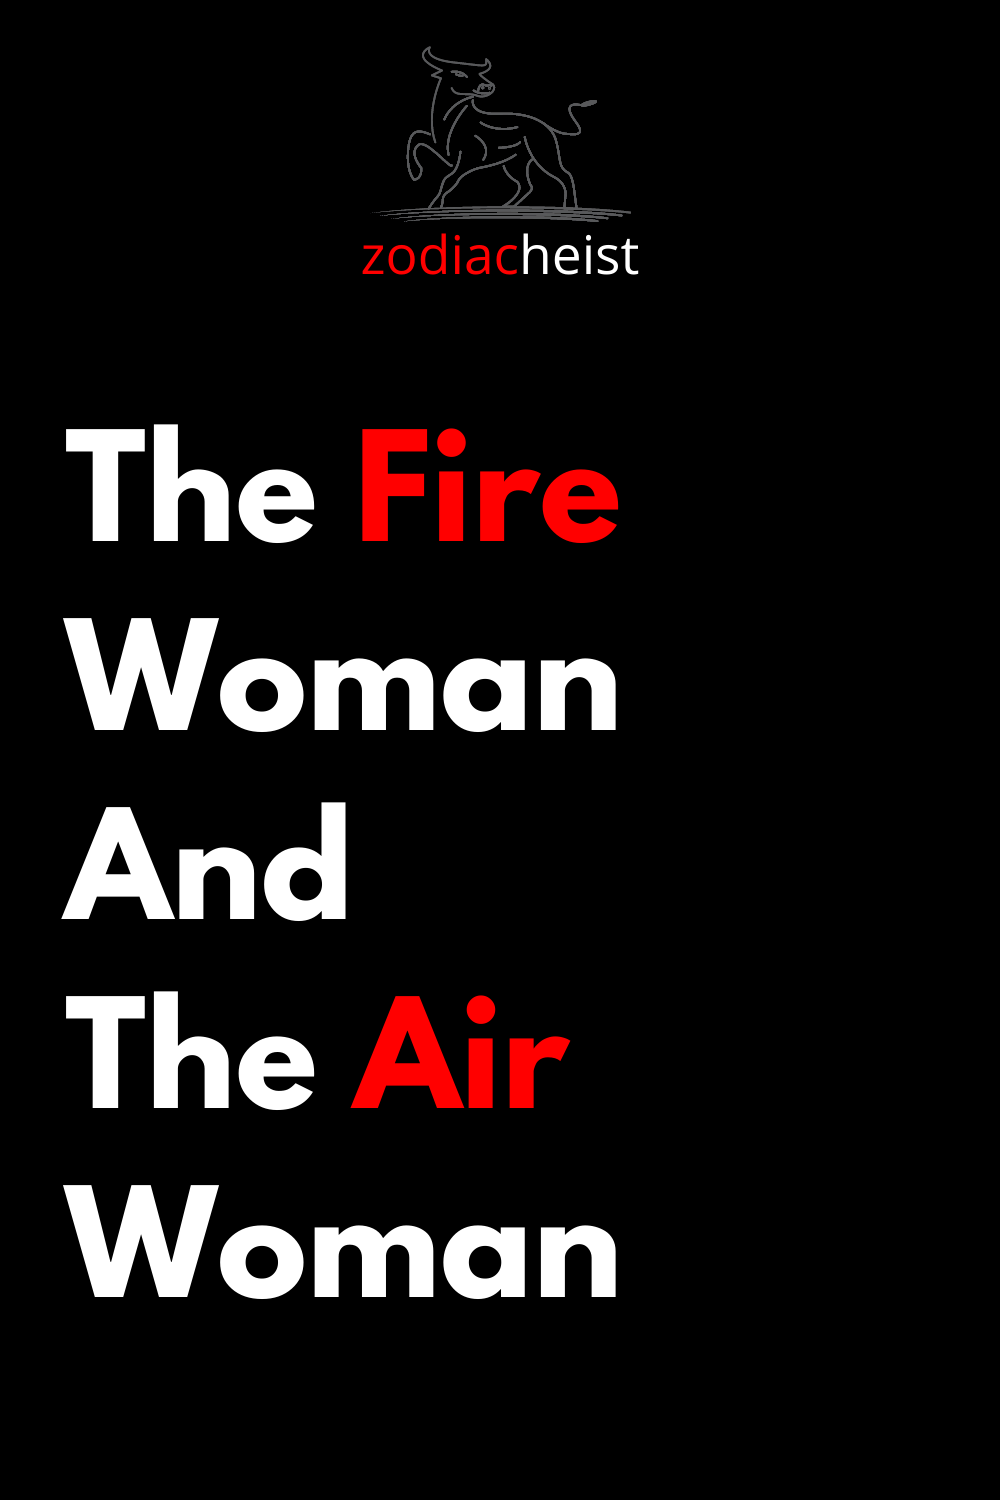 The Fire Woman And The Air Woman